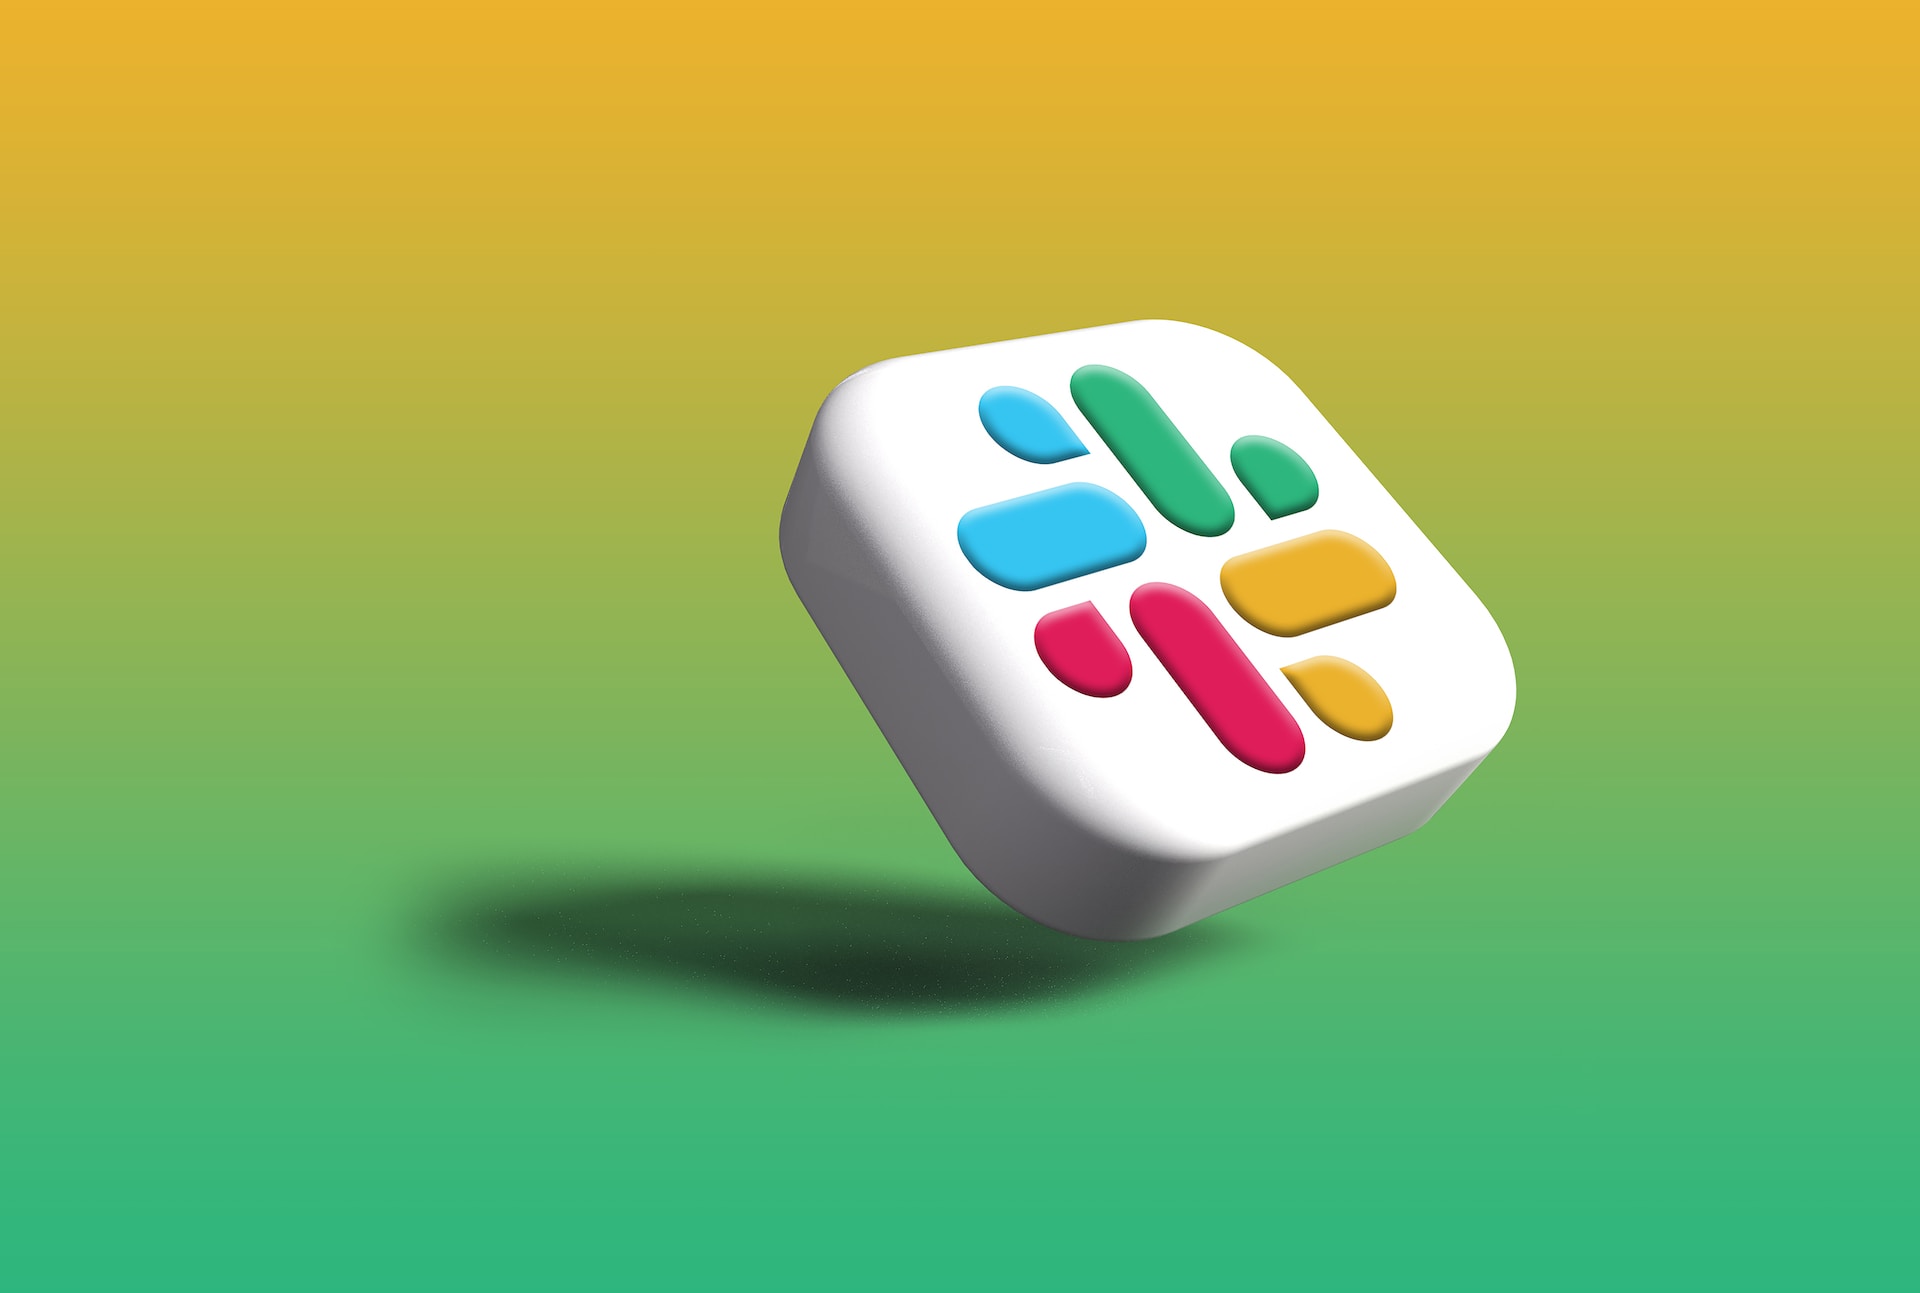 Logo of Slack, one of the application development communication tools you can use.